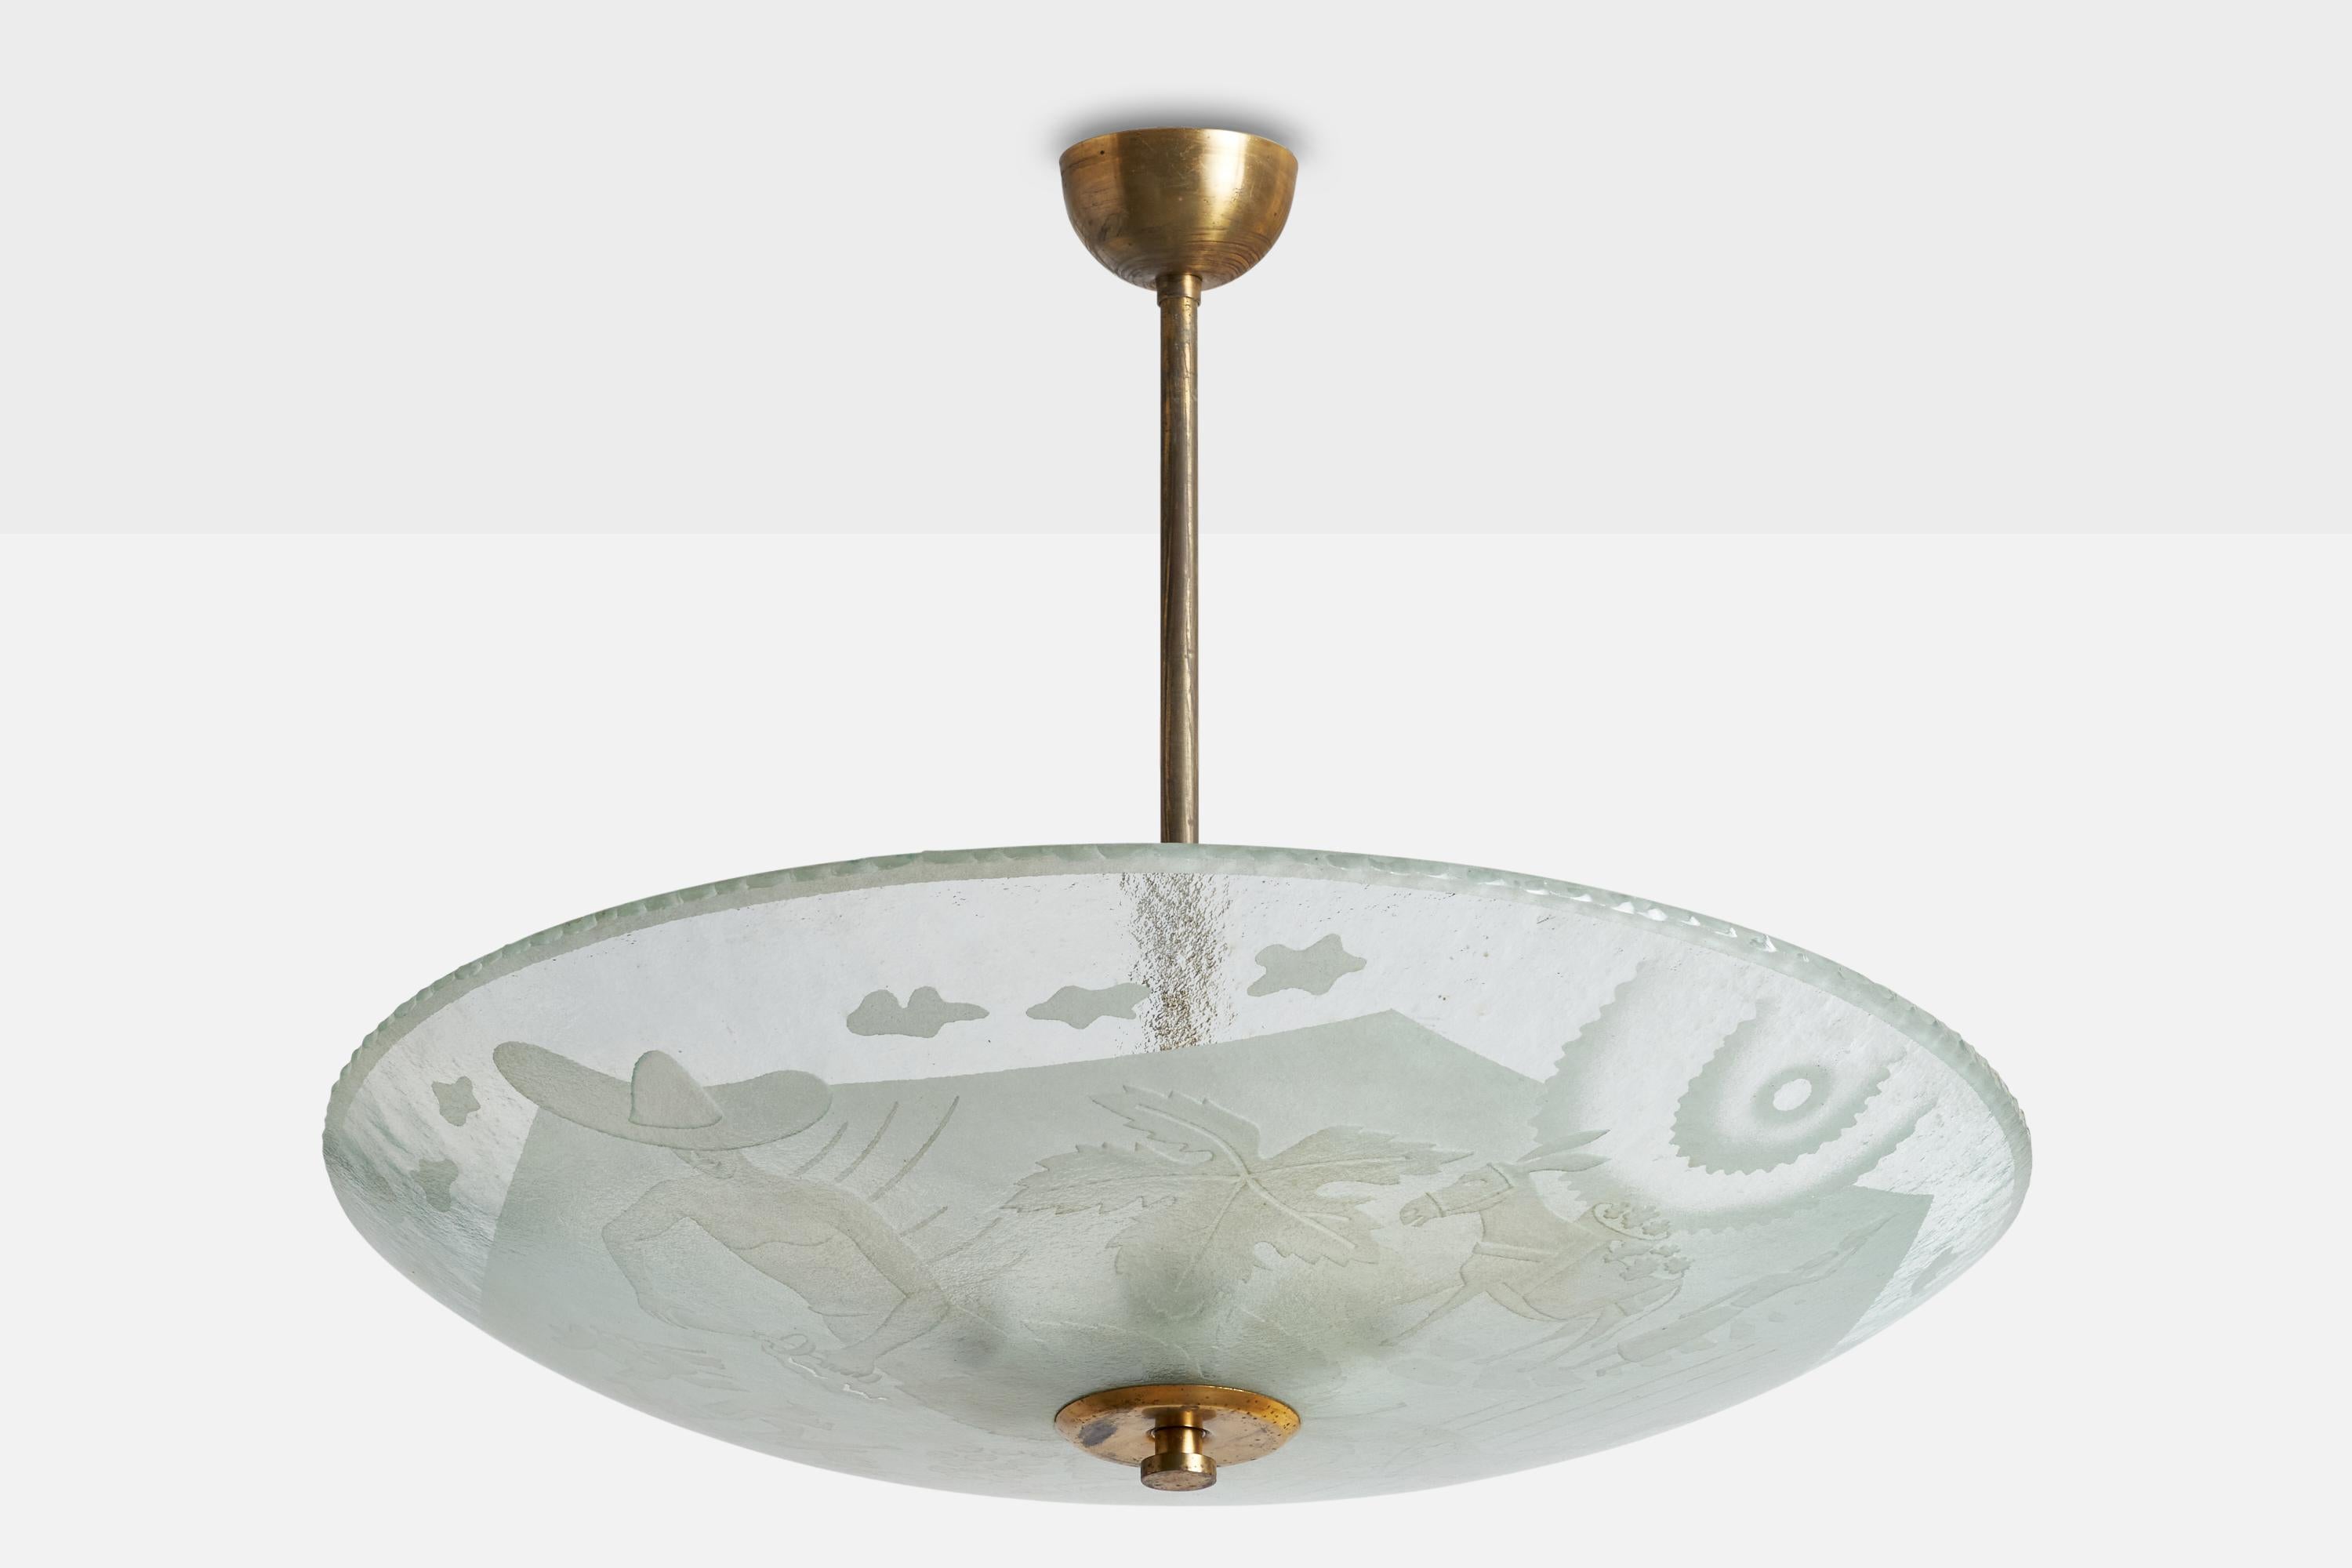 A brass and etched glass pendant designed and produced in Sweden, 1940s.

Dimensions of canopy (inches): 2.5” H x 3.75”  Diameter
Socket takes standard E-26 bulbs. 6 sockets.There is no maximum wattage stated on the fixture. All lighting will be